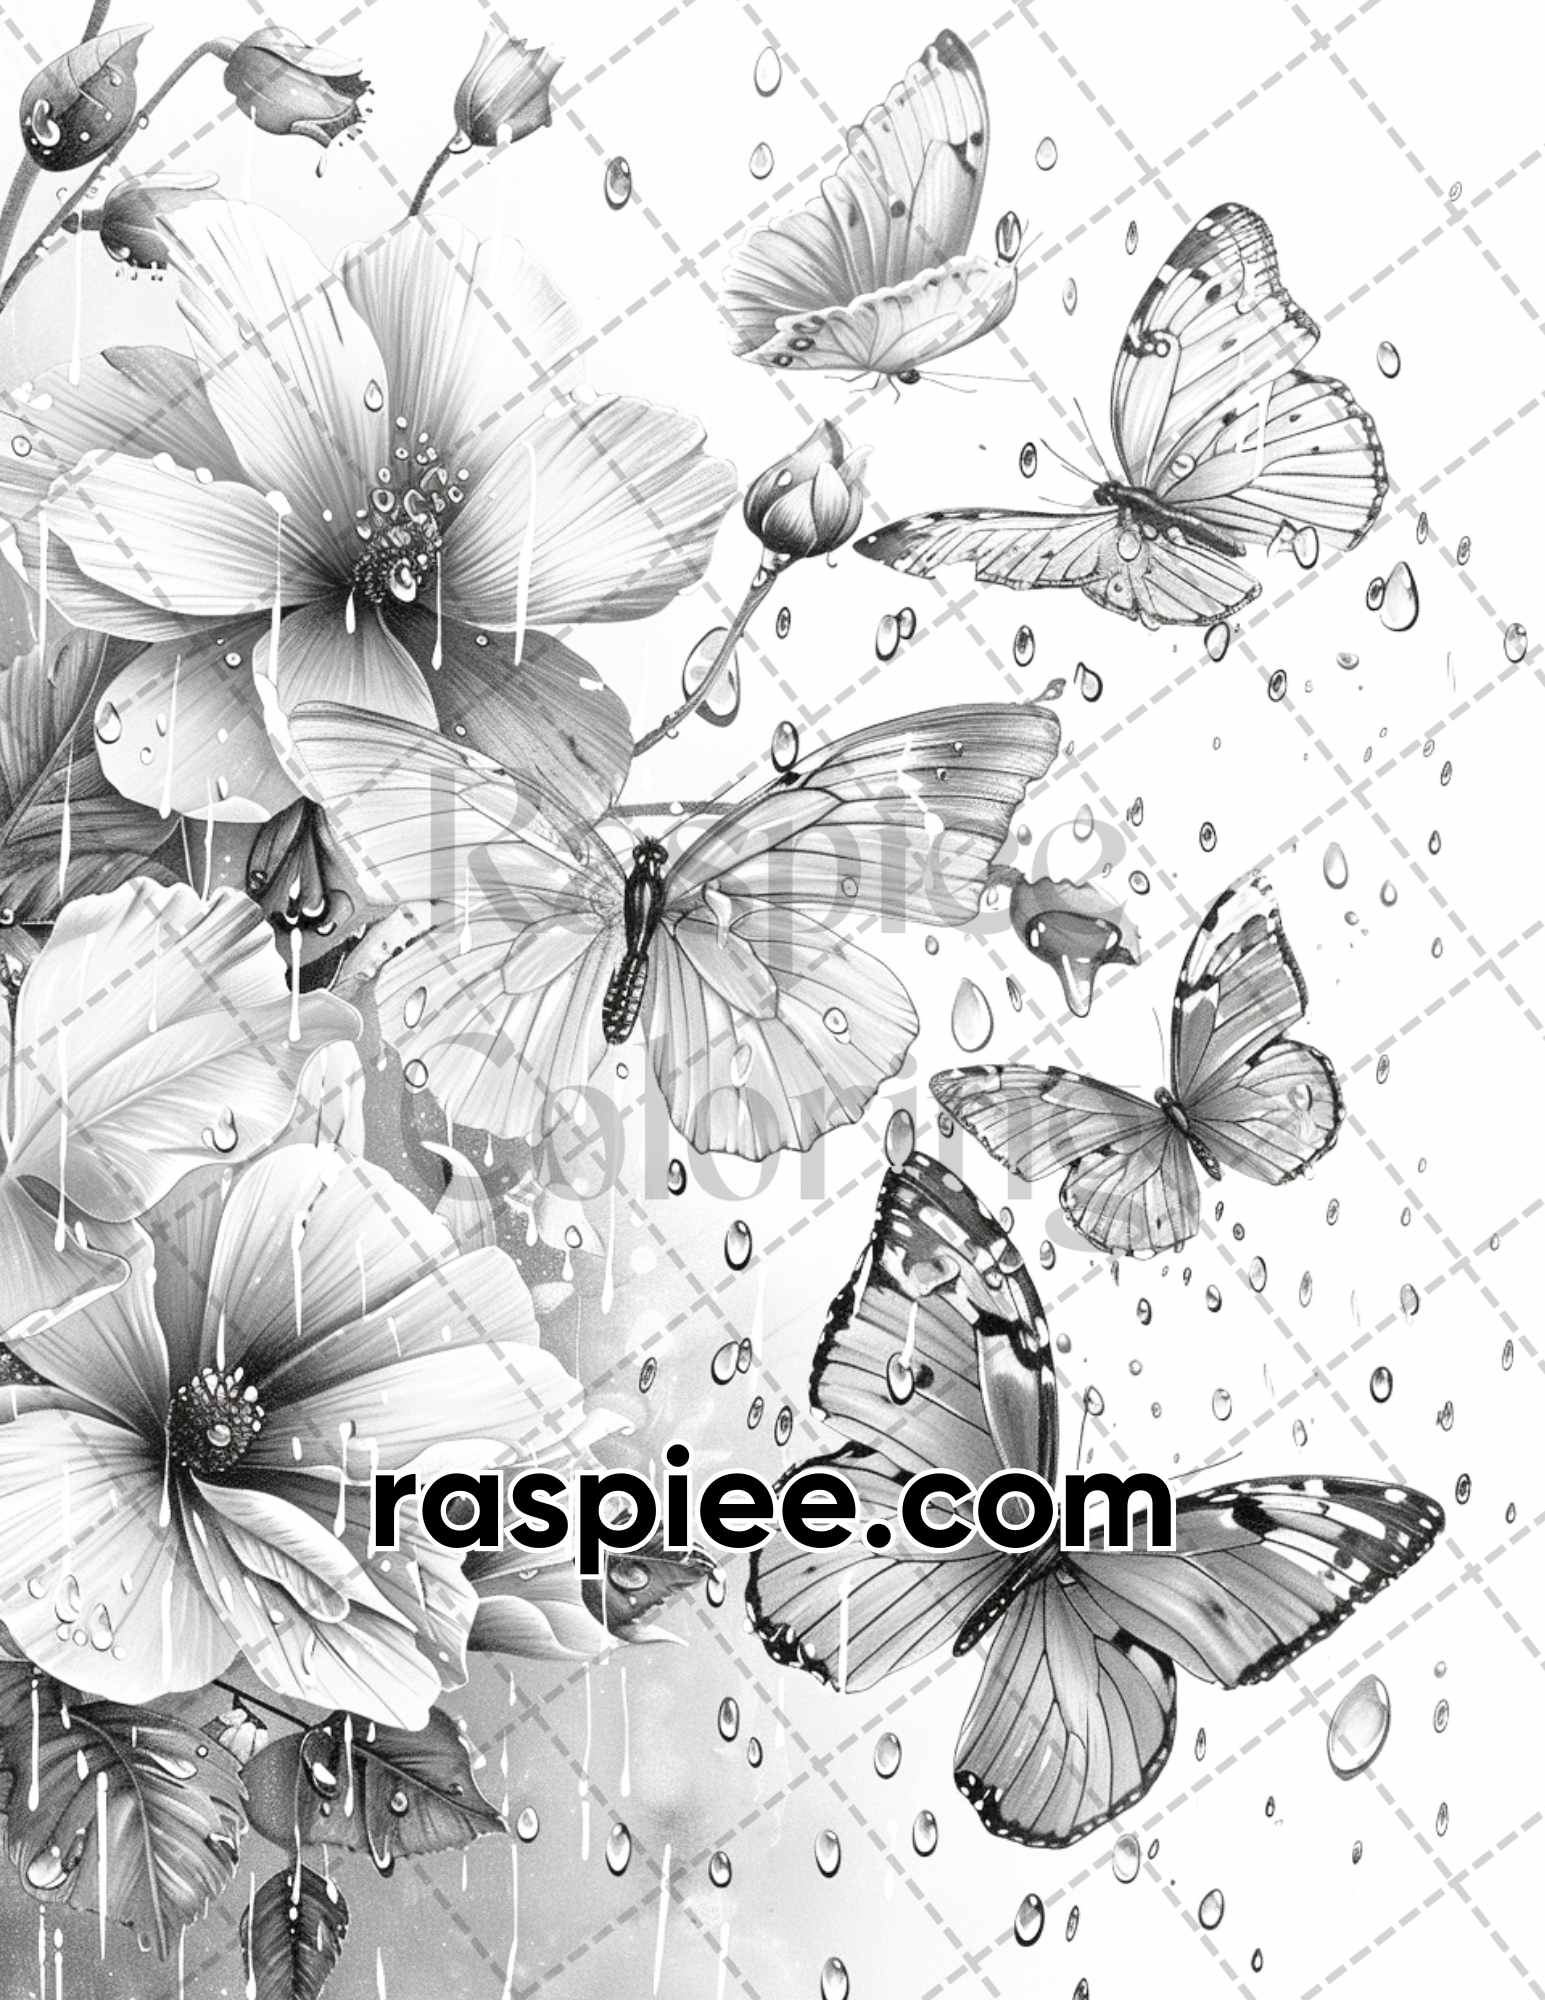 adult coloring pages, adult coloring sheets, adult coloring book pdf, adult coloring book printable, grayscale coloring pages, grayscale coloring books, insect coloring pages for adults, insect coloring book, grayscale illustration, Butterflies and Moths Grayscale Adult Coloring Pages 